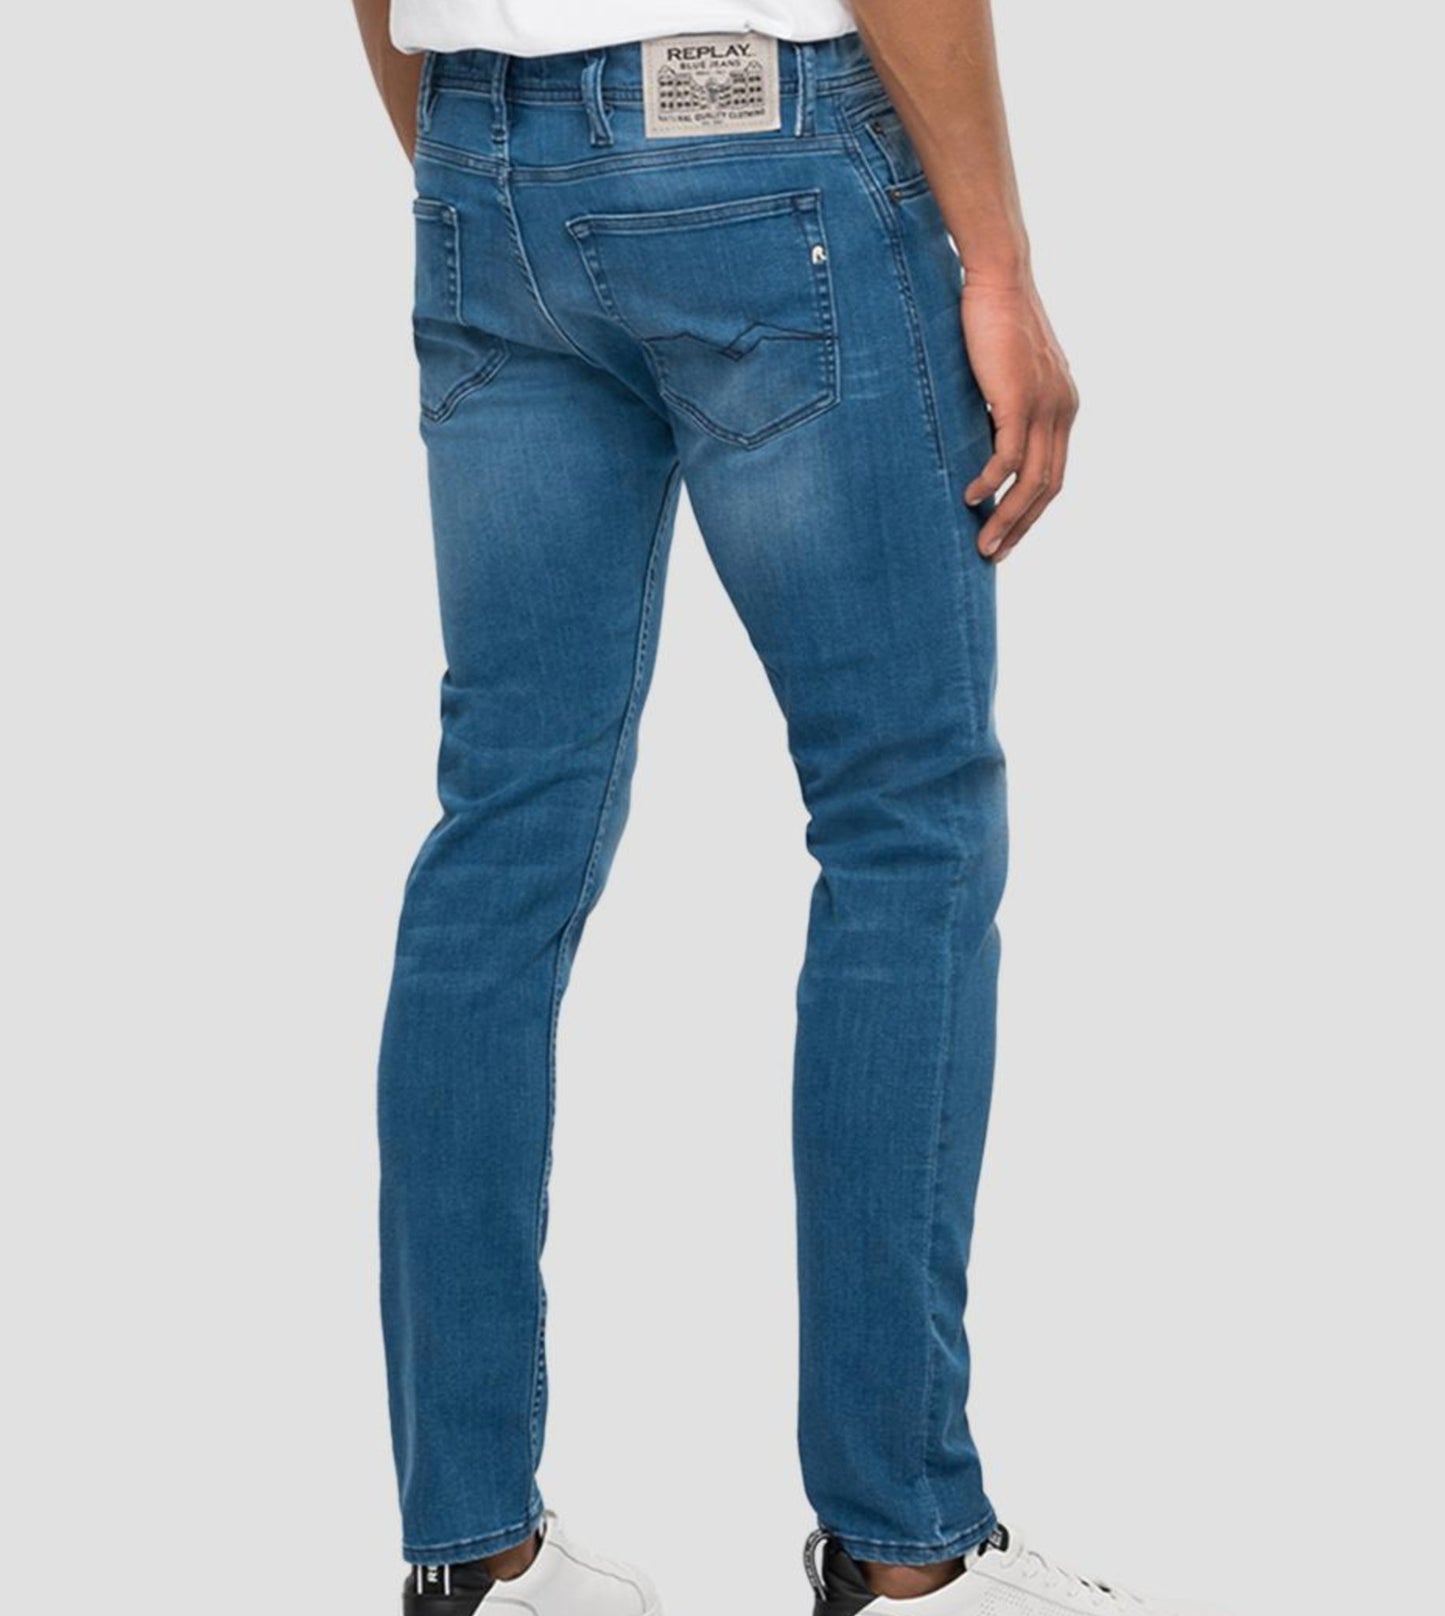 Replay Skinny Fit Jondrill Jeans - Blue - GLS Clothing